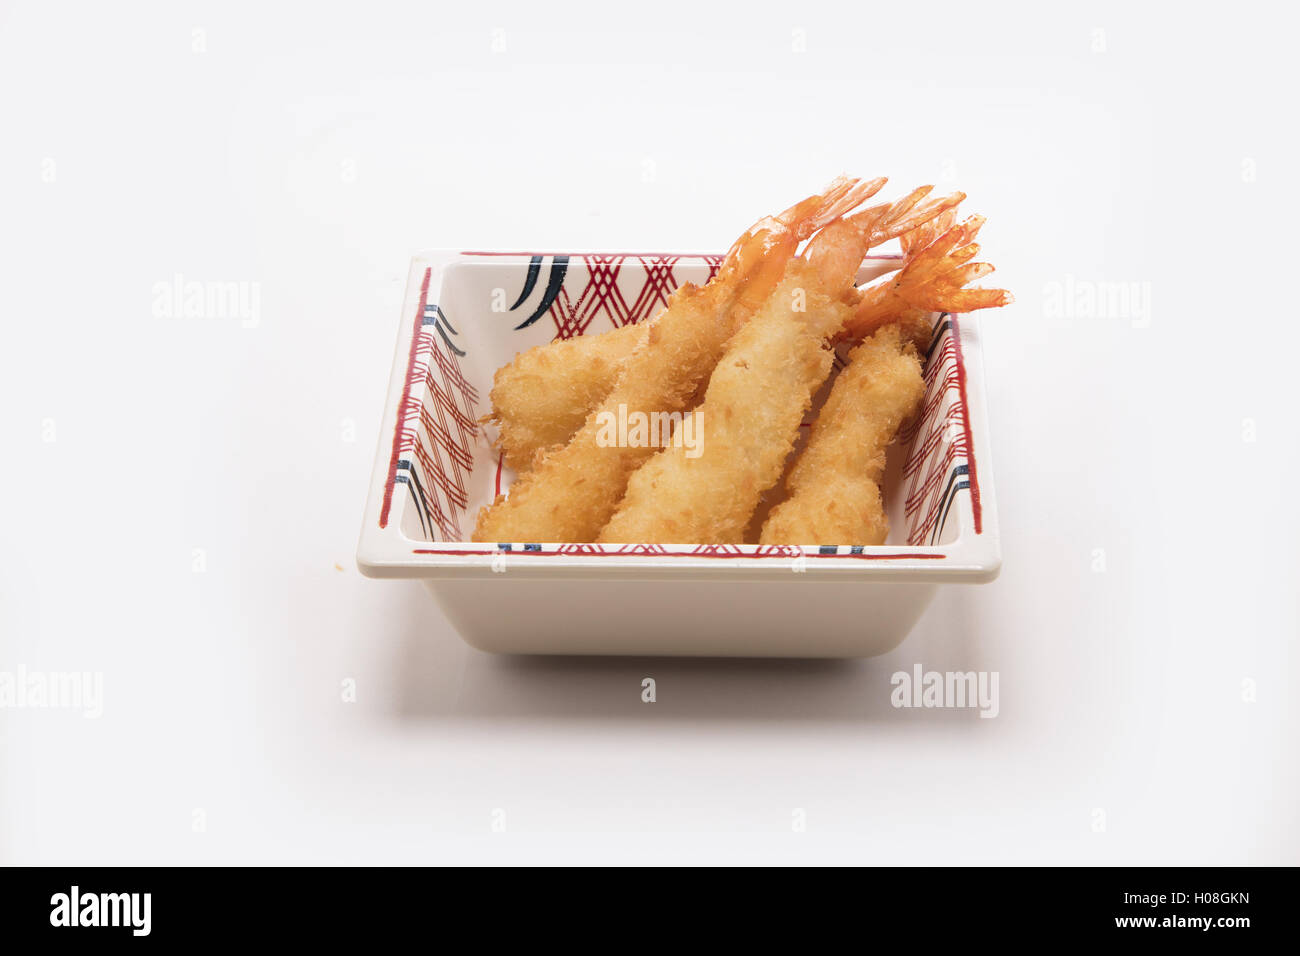 Shrimp in batter floured and fried Stock Photo